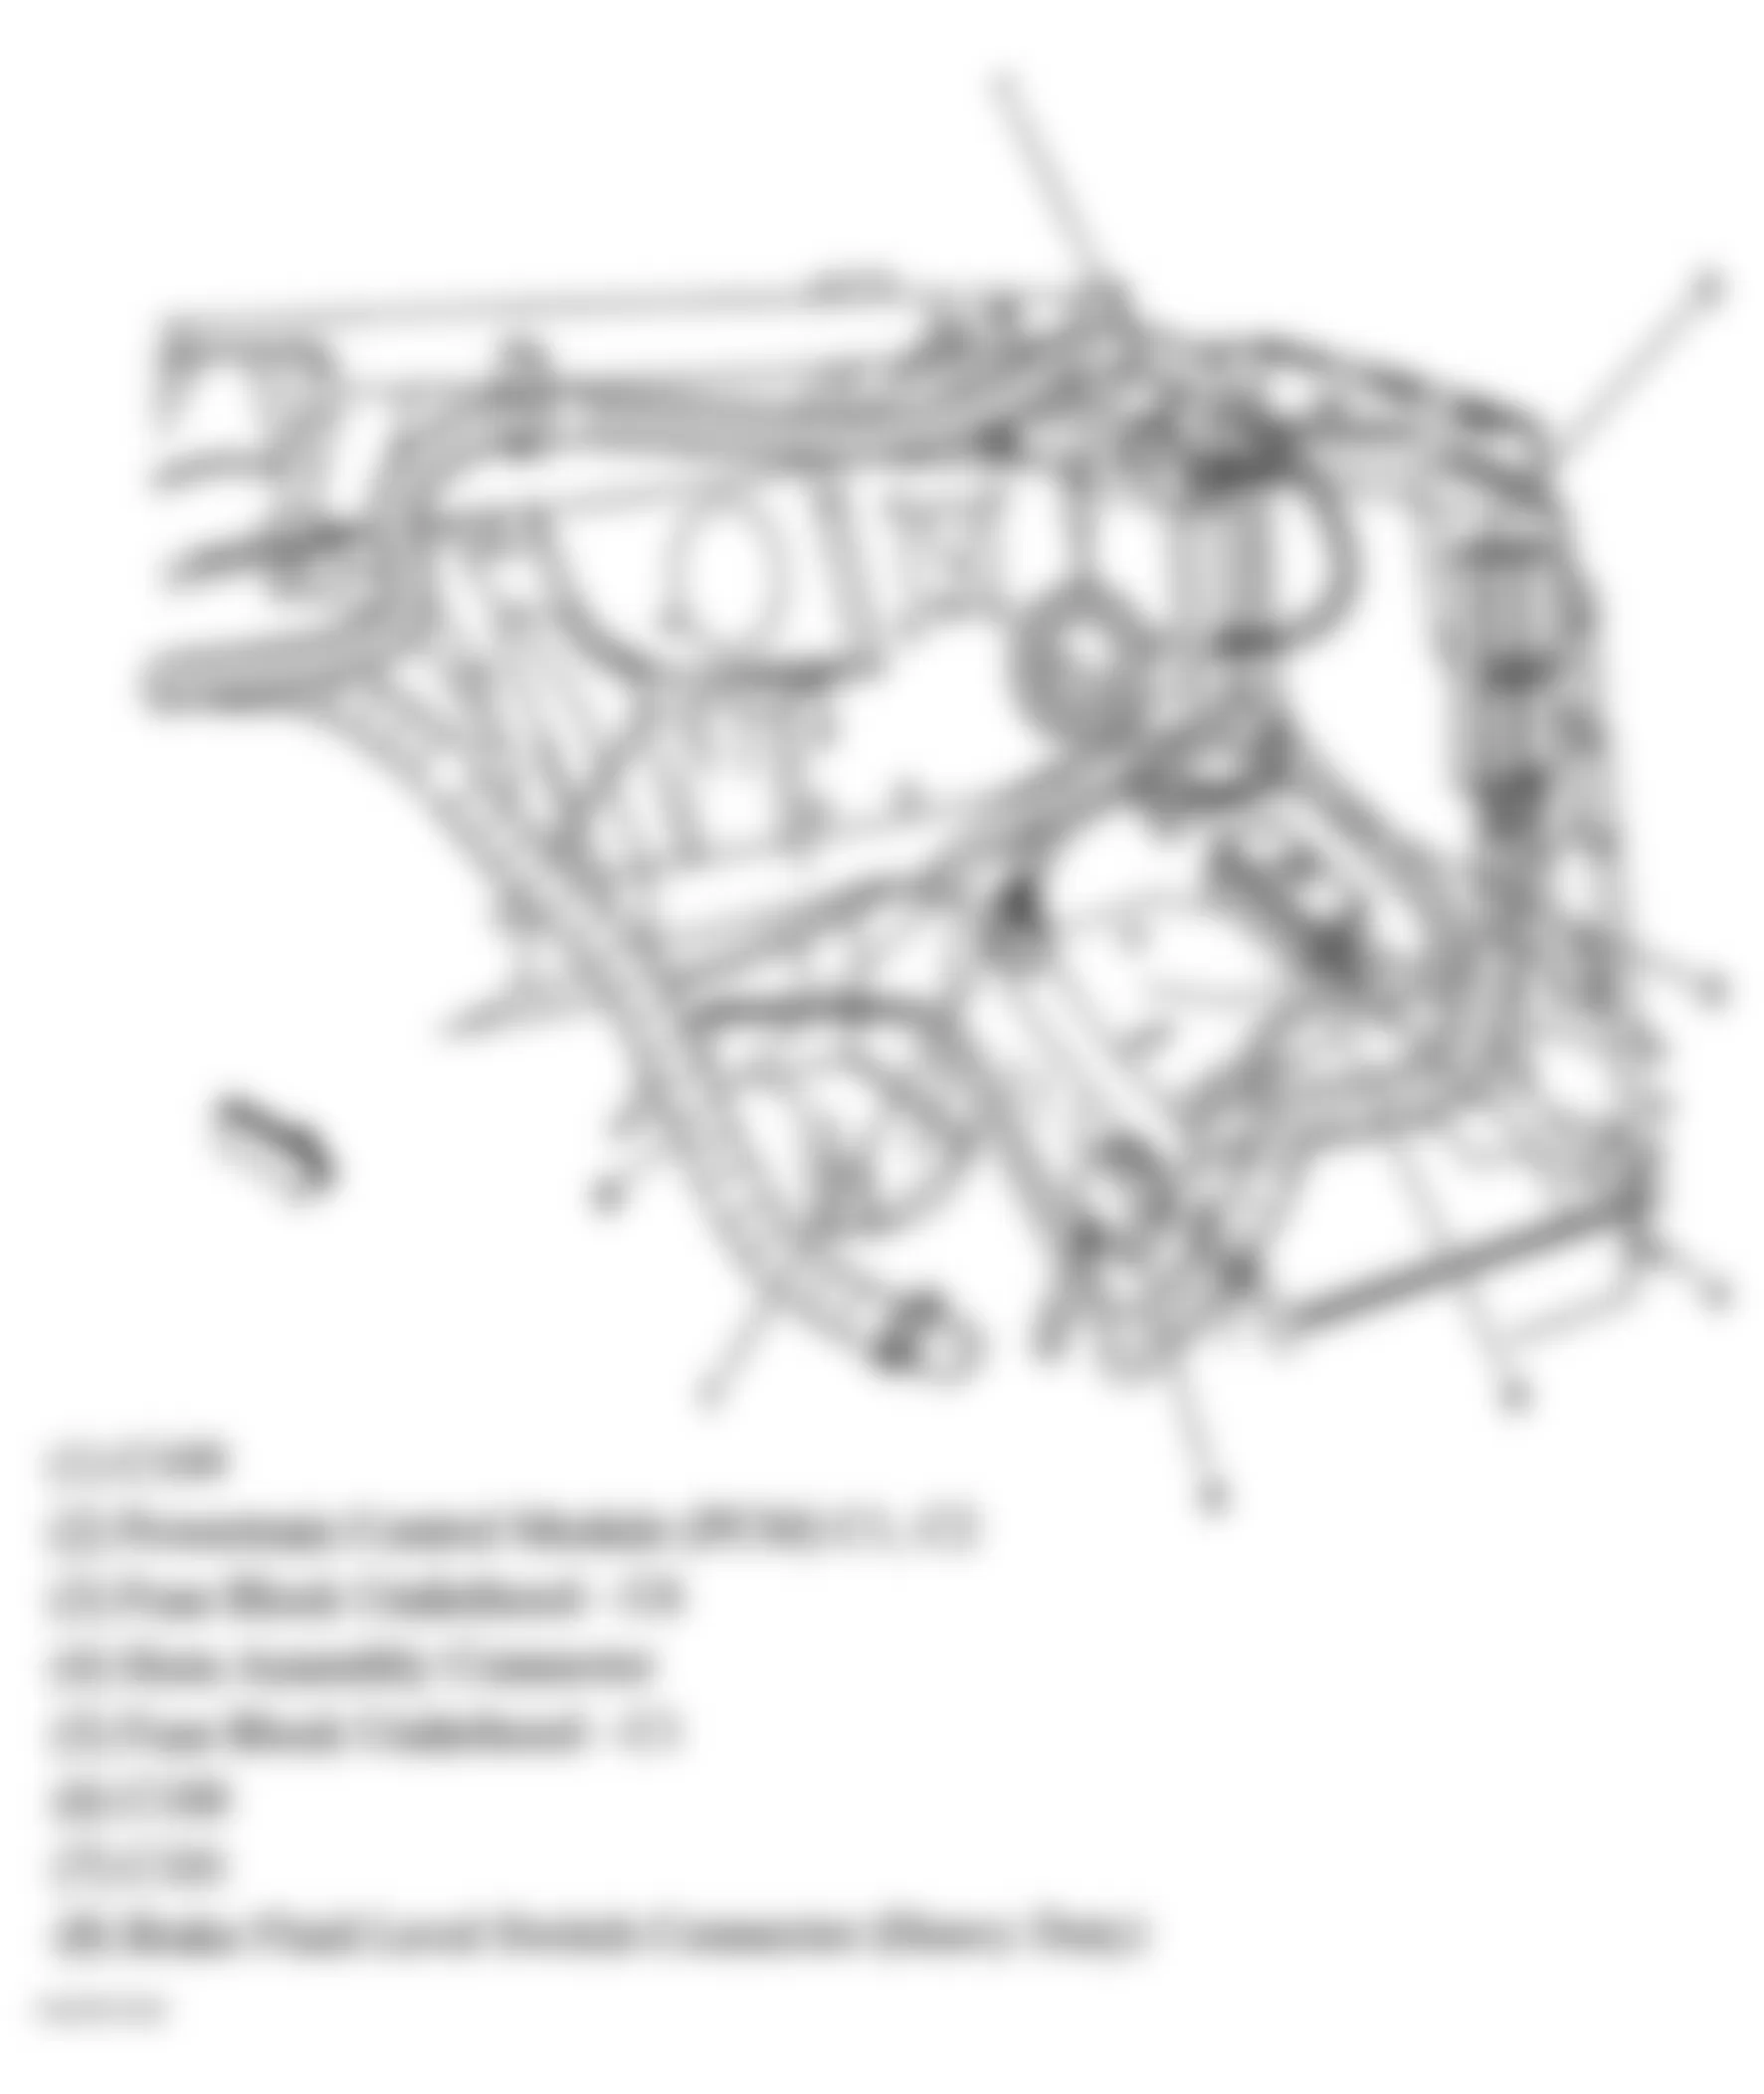 GMC Savana G1500 2006 - Component Locations -  Left Rear Of Engine Compartment